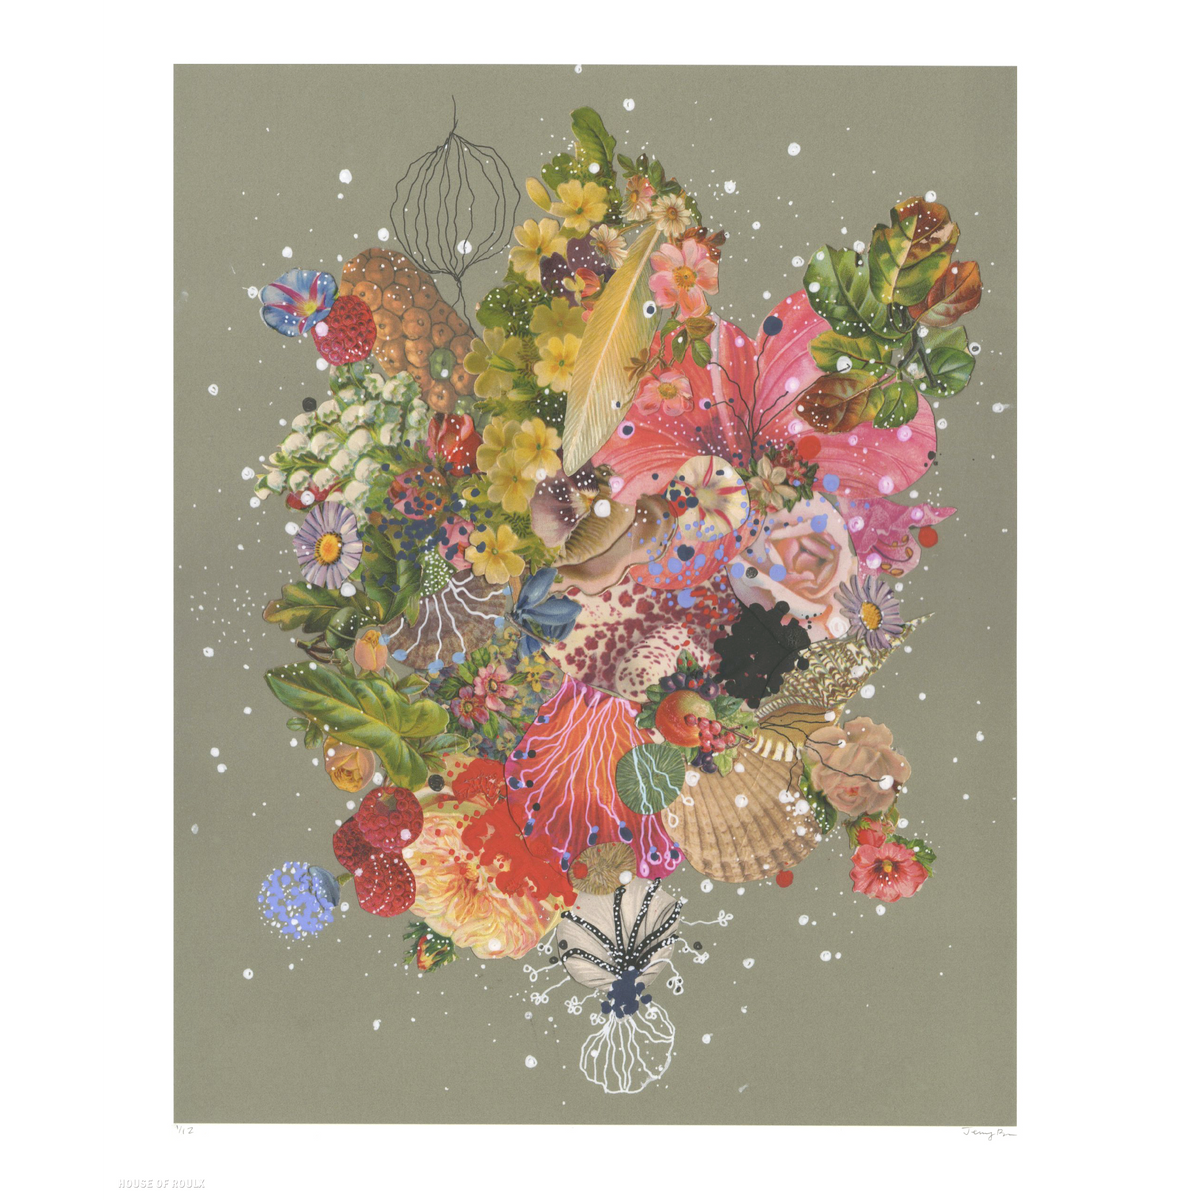 Jenny Brown &quot;Night Frosted Flowers&quot; - Archival Print, Limited Edition of 12 - 14 x 17&quot;